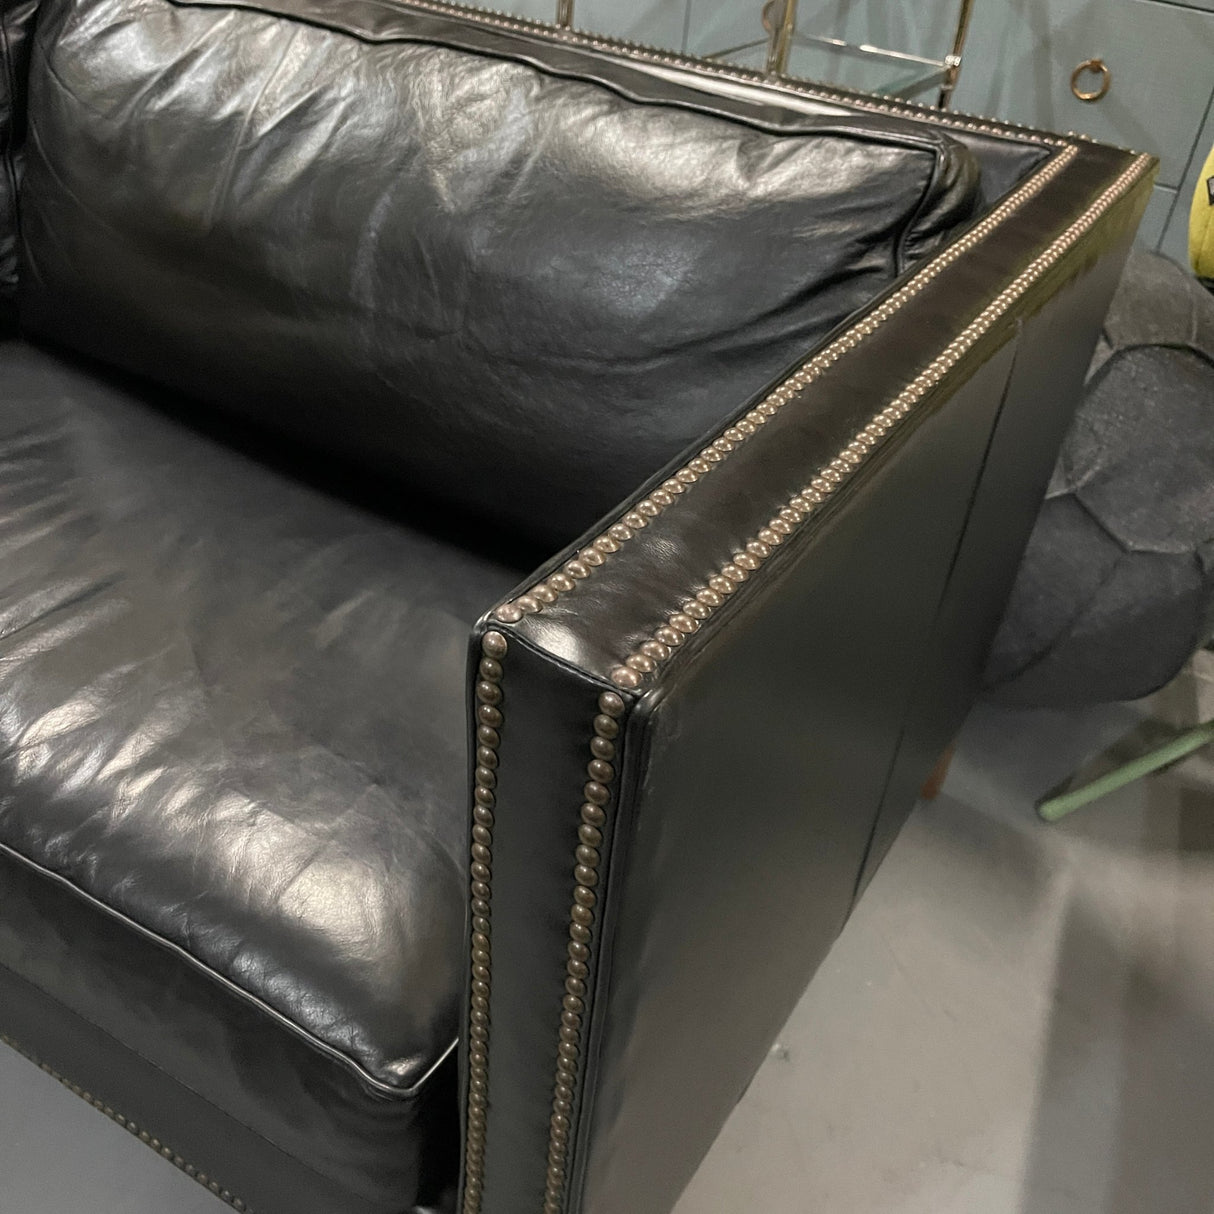 Mitchell Gold + Bob Williams leather sofa - enliven mart